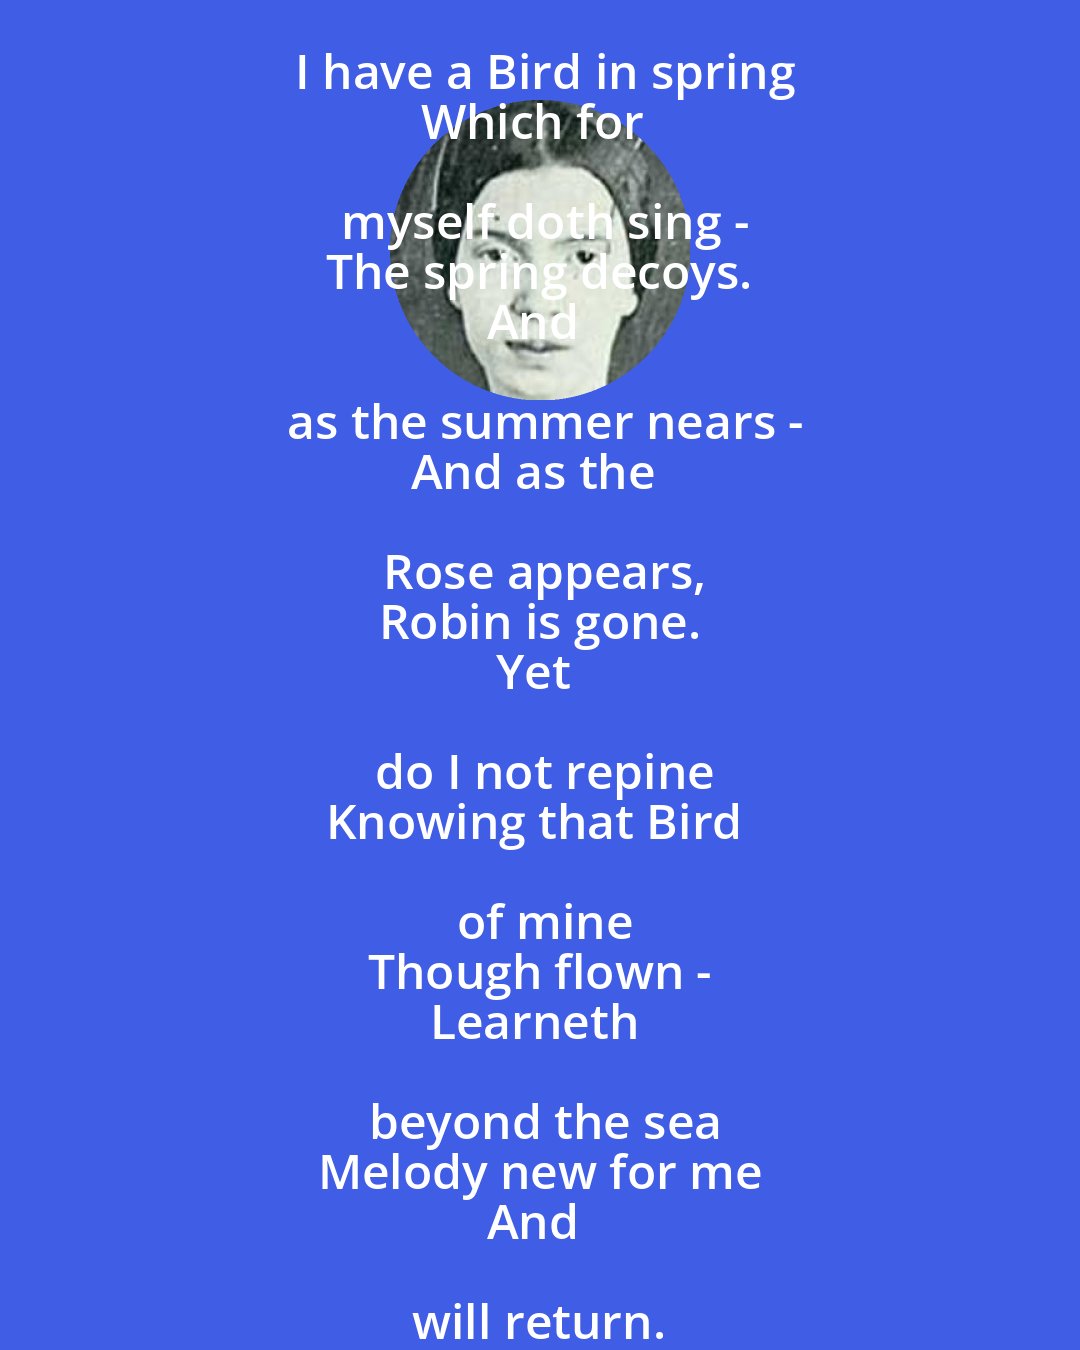 Emily Dickinson: I have a Bird in spring
Which for myself doth sing -
The spring decoys.
And as the summer nears -
And as the Rose appears,
Robin is gone.
Yet do I not repine
Knowing that Bird of mine
Though flown -
Learneth beyond the sea
Melody new for me
And will return.